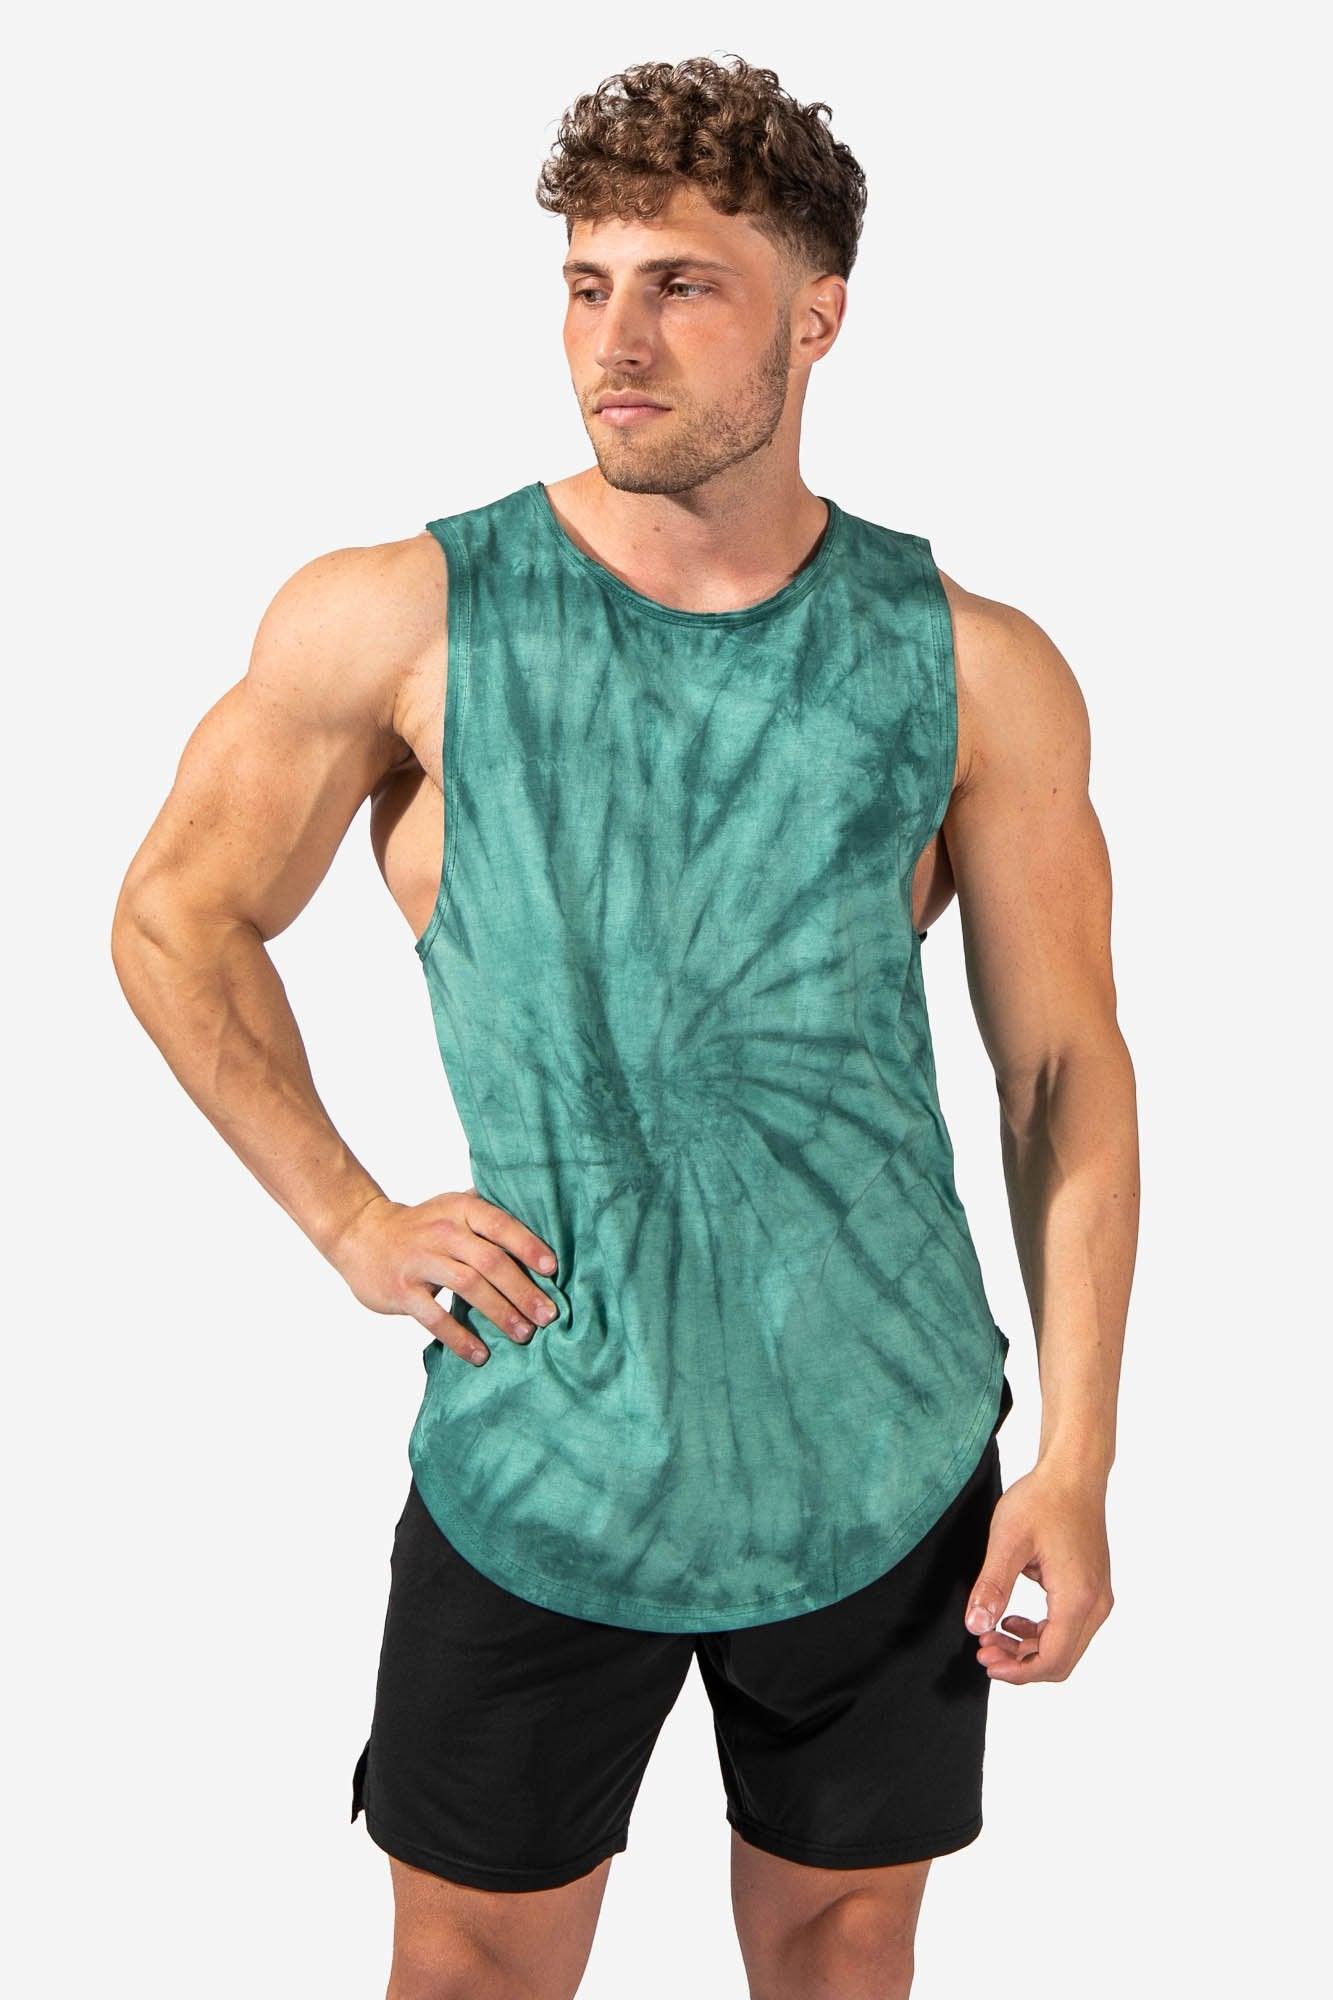 Cutoff Tee - Men's sleeveless workout shirt - Available in 10